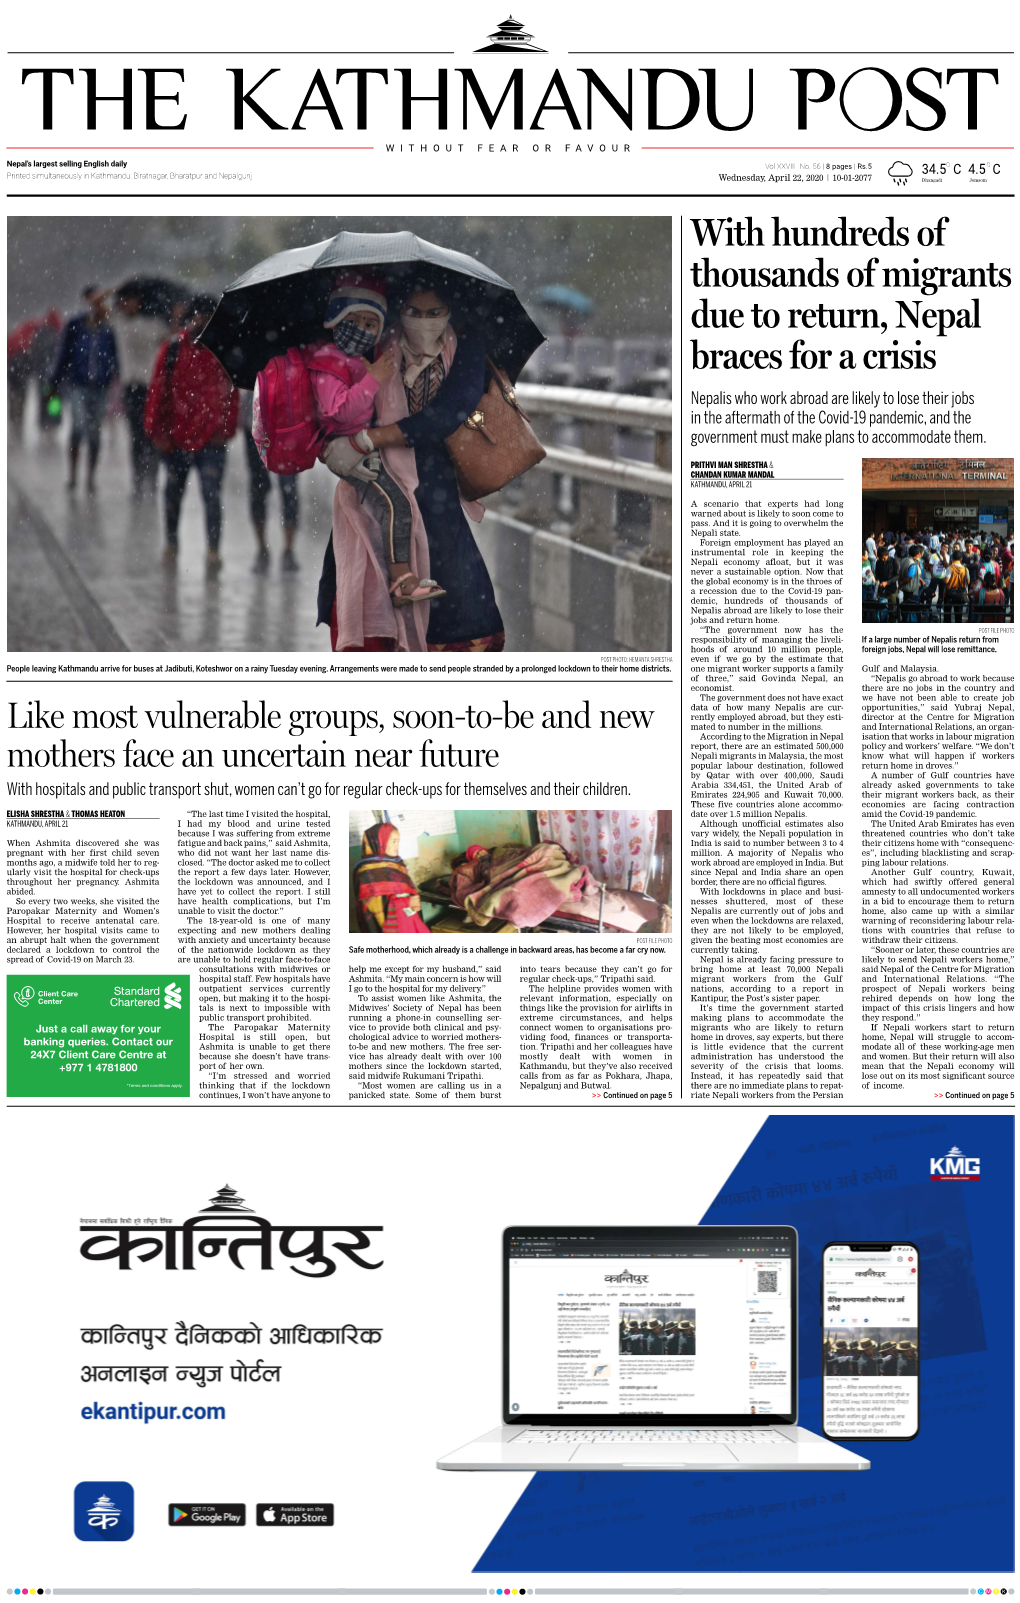 With Hundreds of Thousands of Migrants Due to Return, Nepal